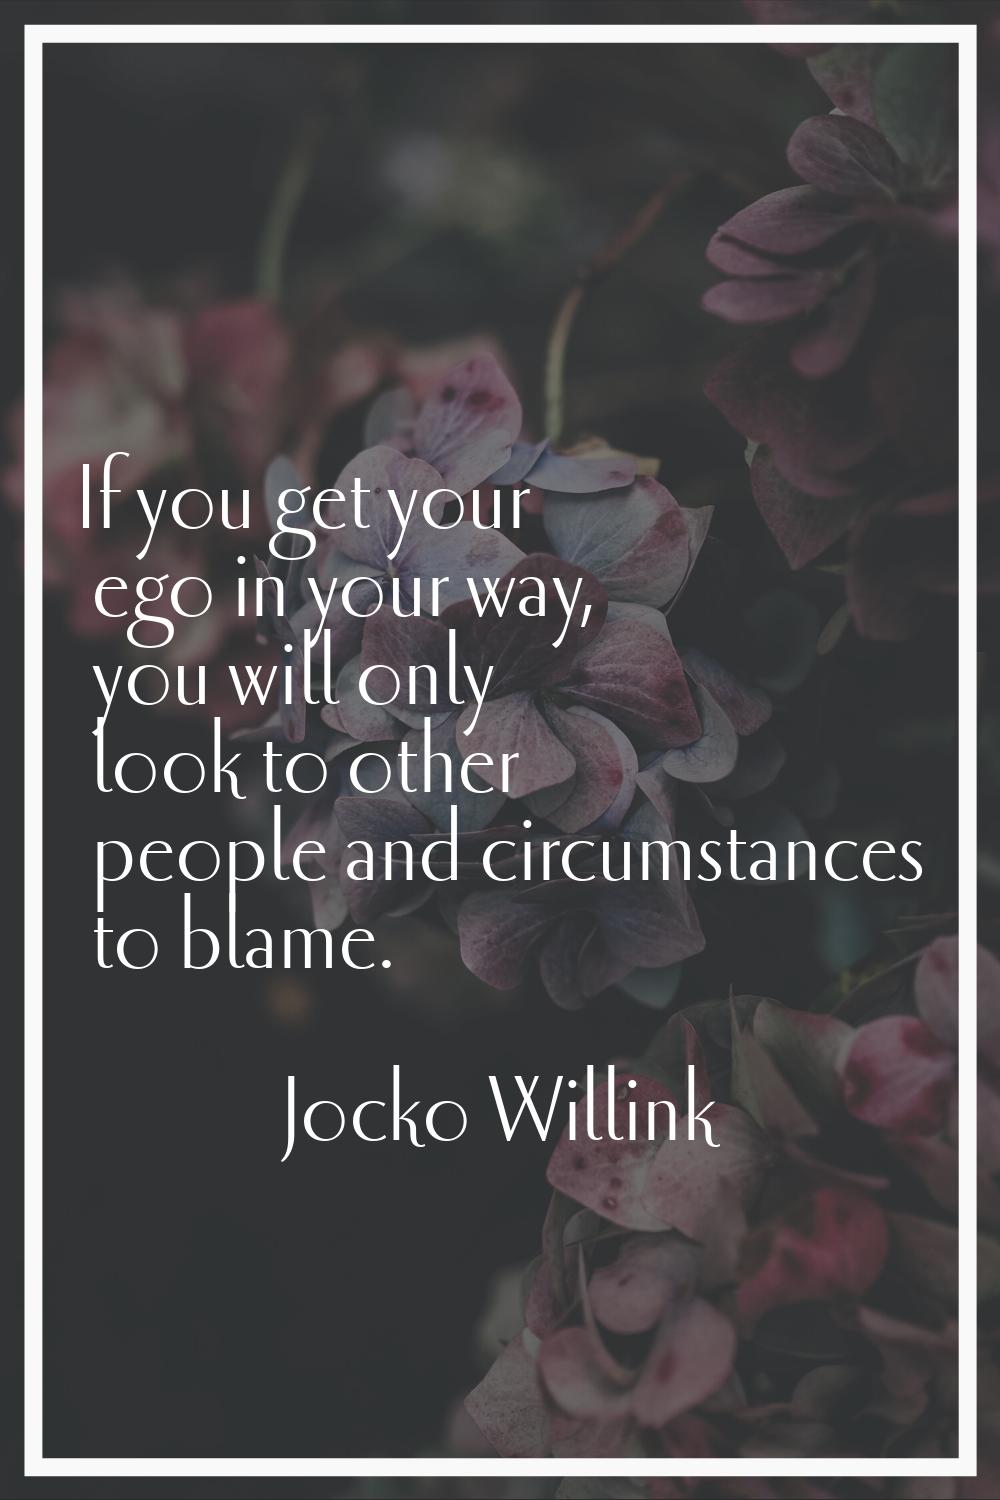 If you get your ego in your way, you will only look to other people and circumstances to blame.